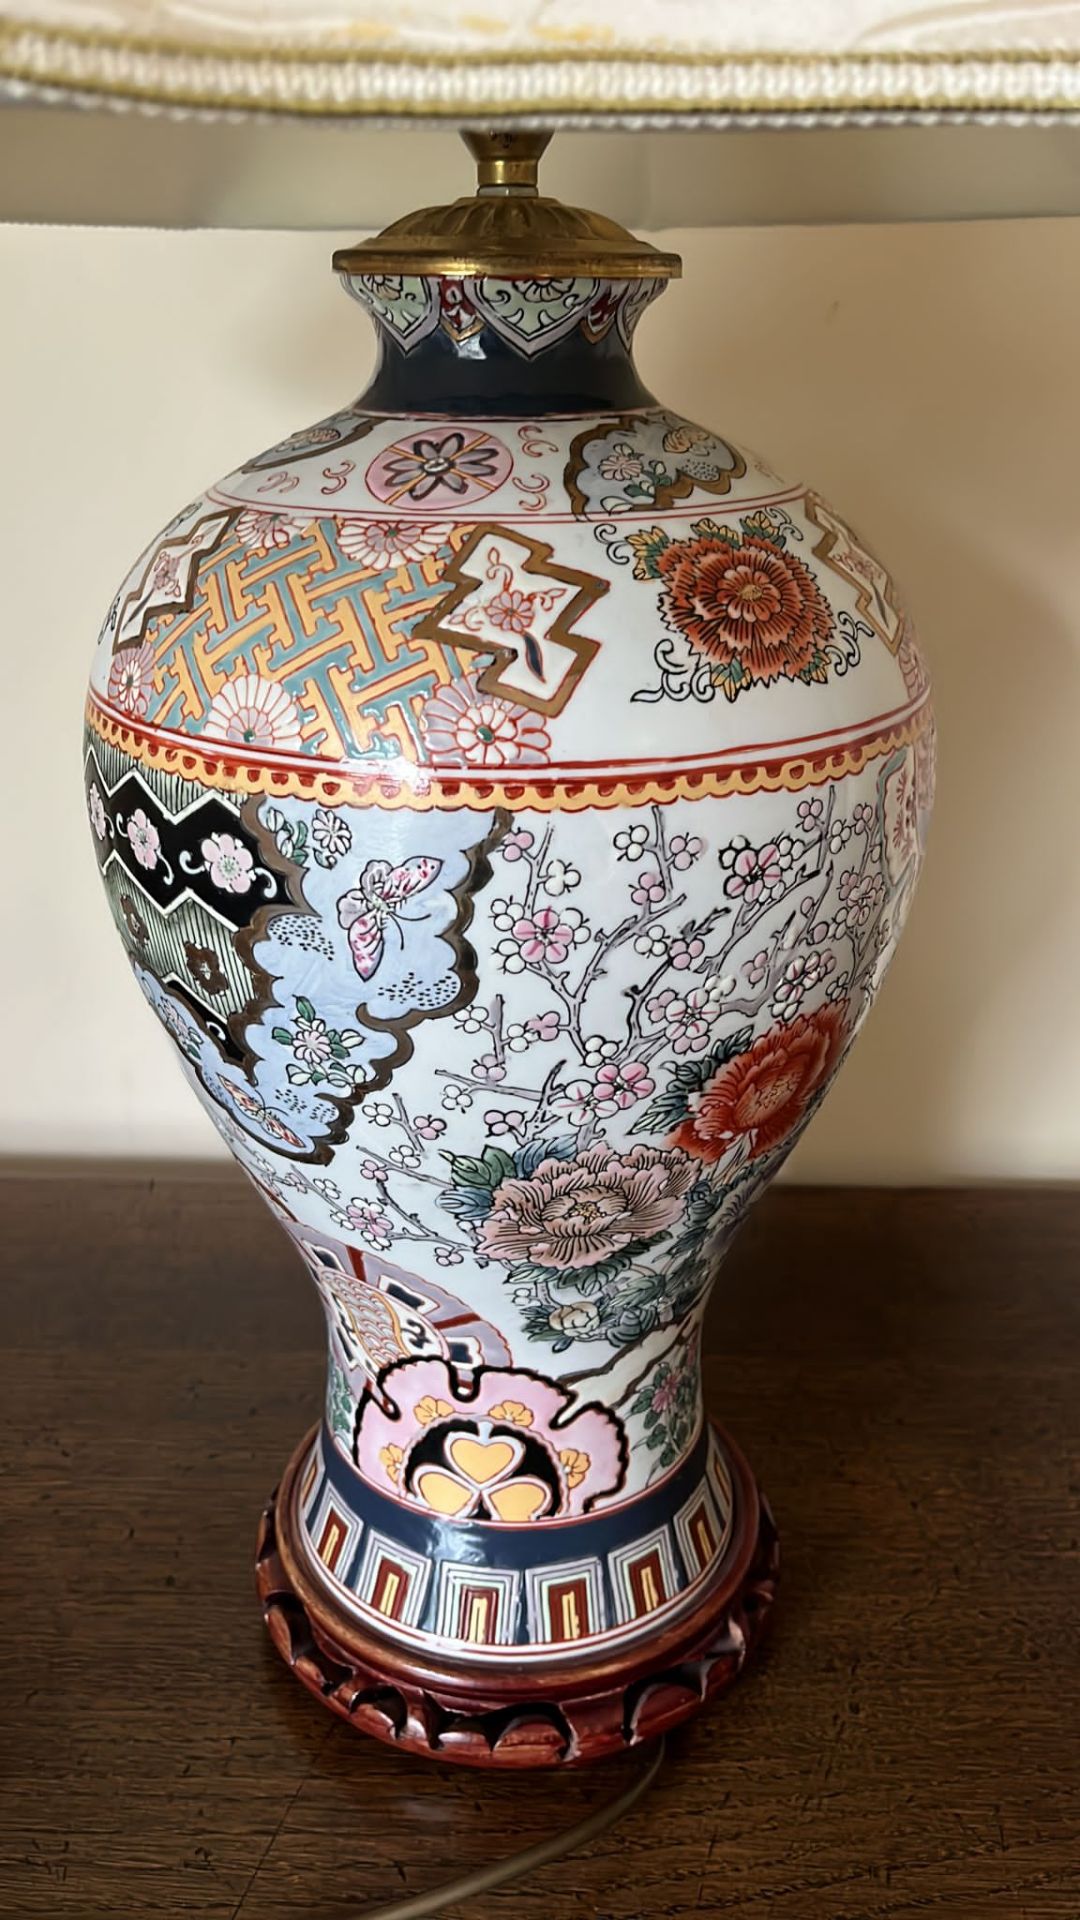 A CHINESE ENAMEL DESIGN TABLE LAMP WITH GEOMETRIC AND FLORAL DESIGNS, ON CARVED WOODEN BASE AND - Image 2 of 5